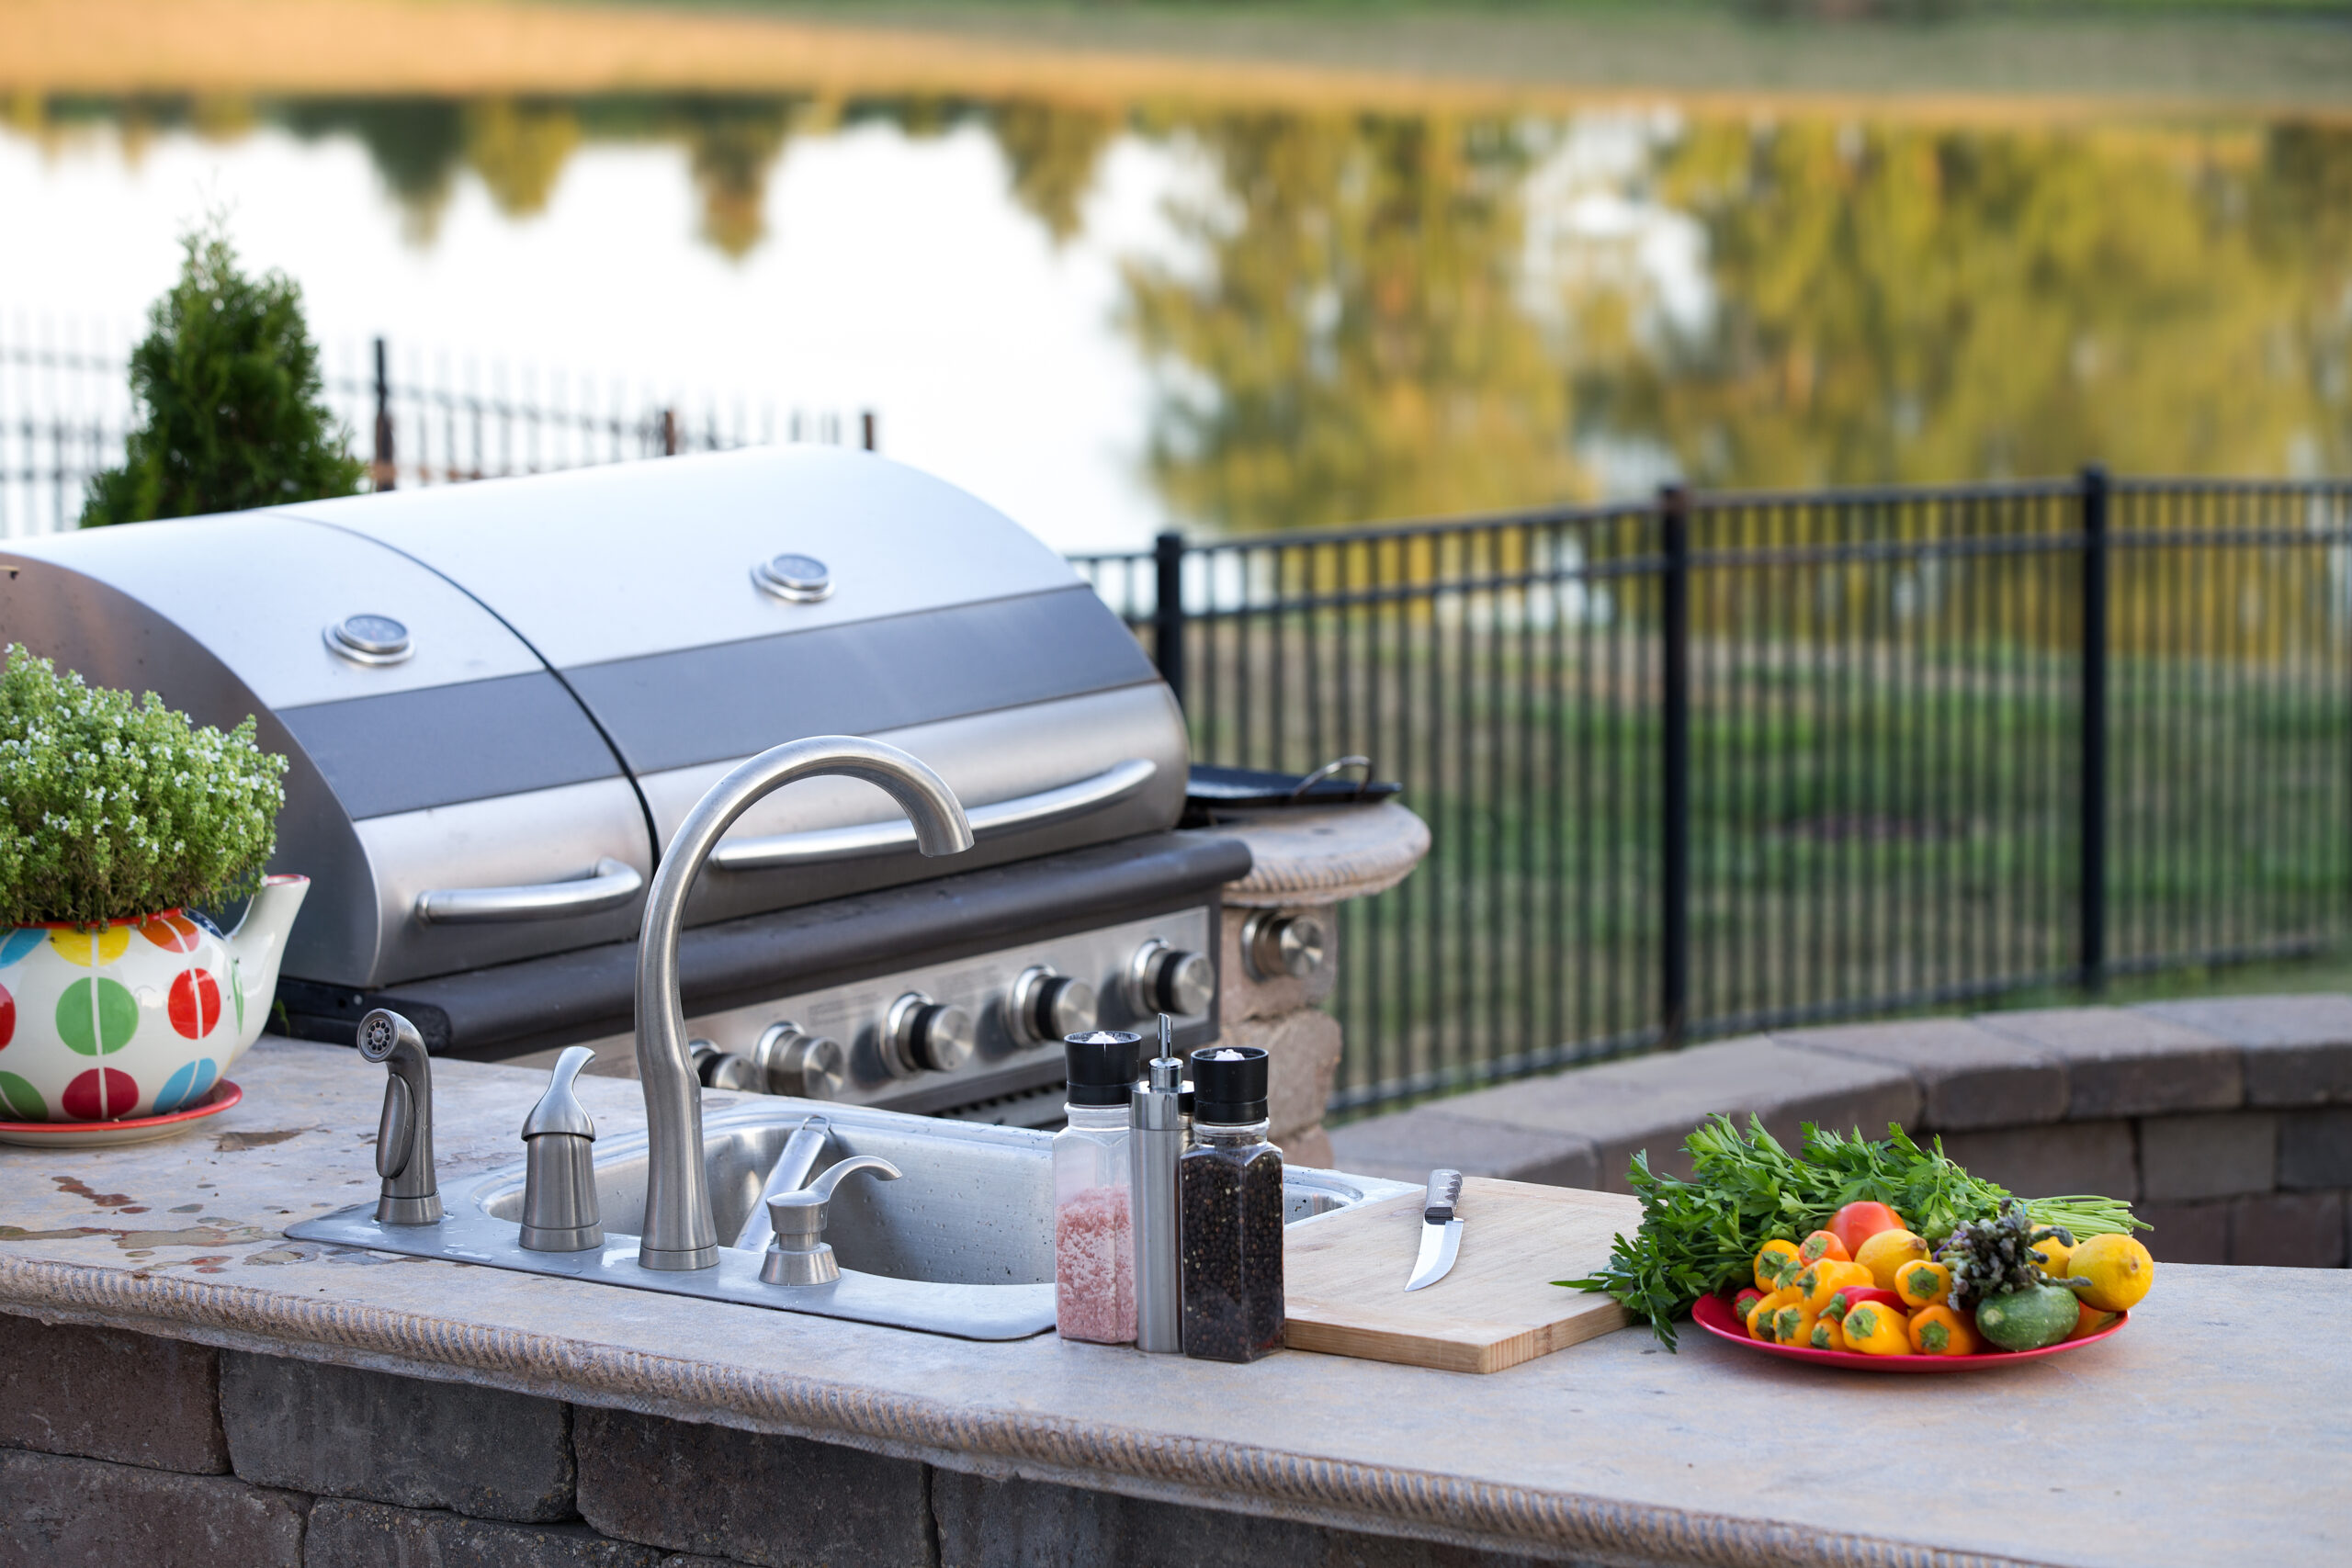 Why Every Backyard Kitchen Needs an Outdoor Sink